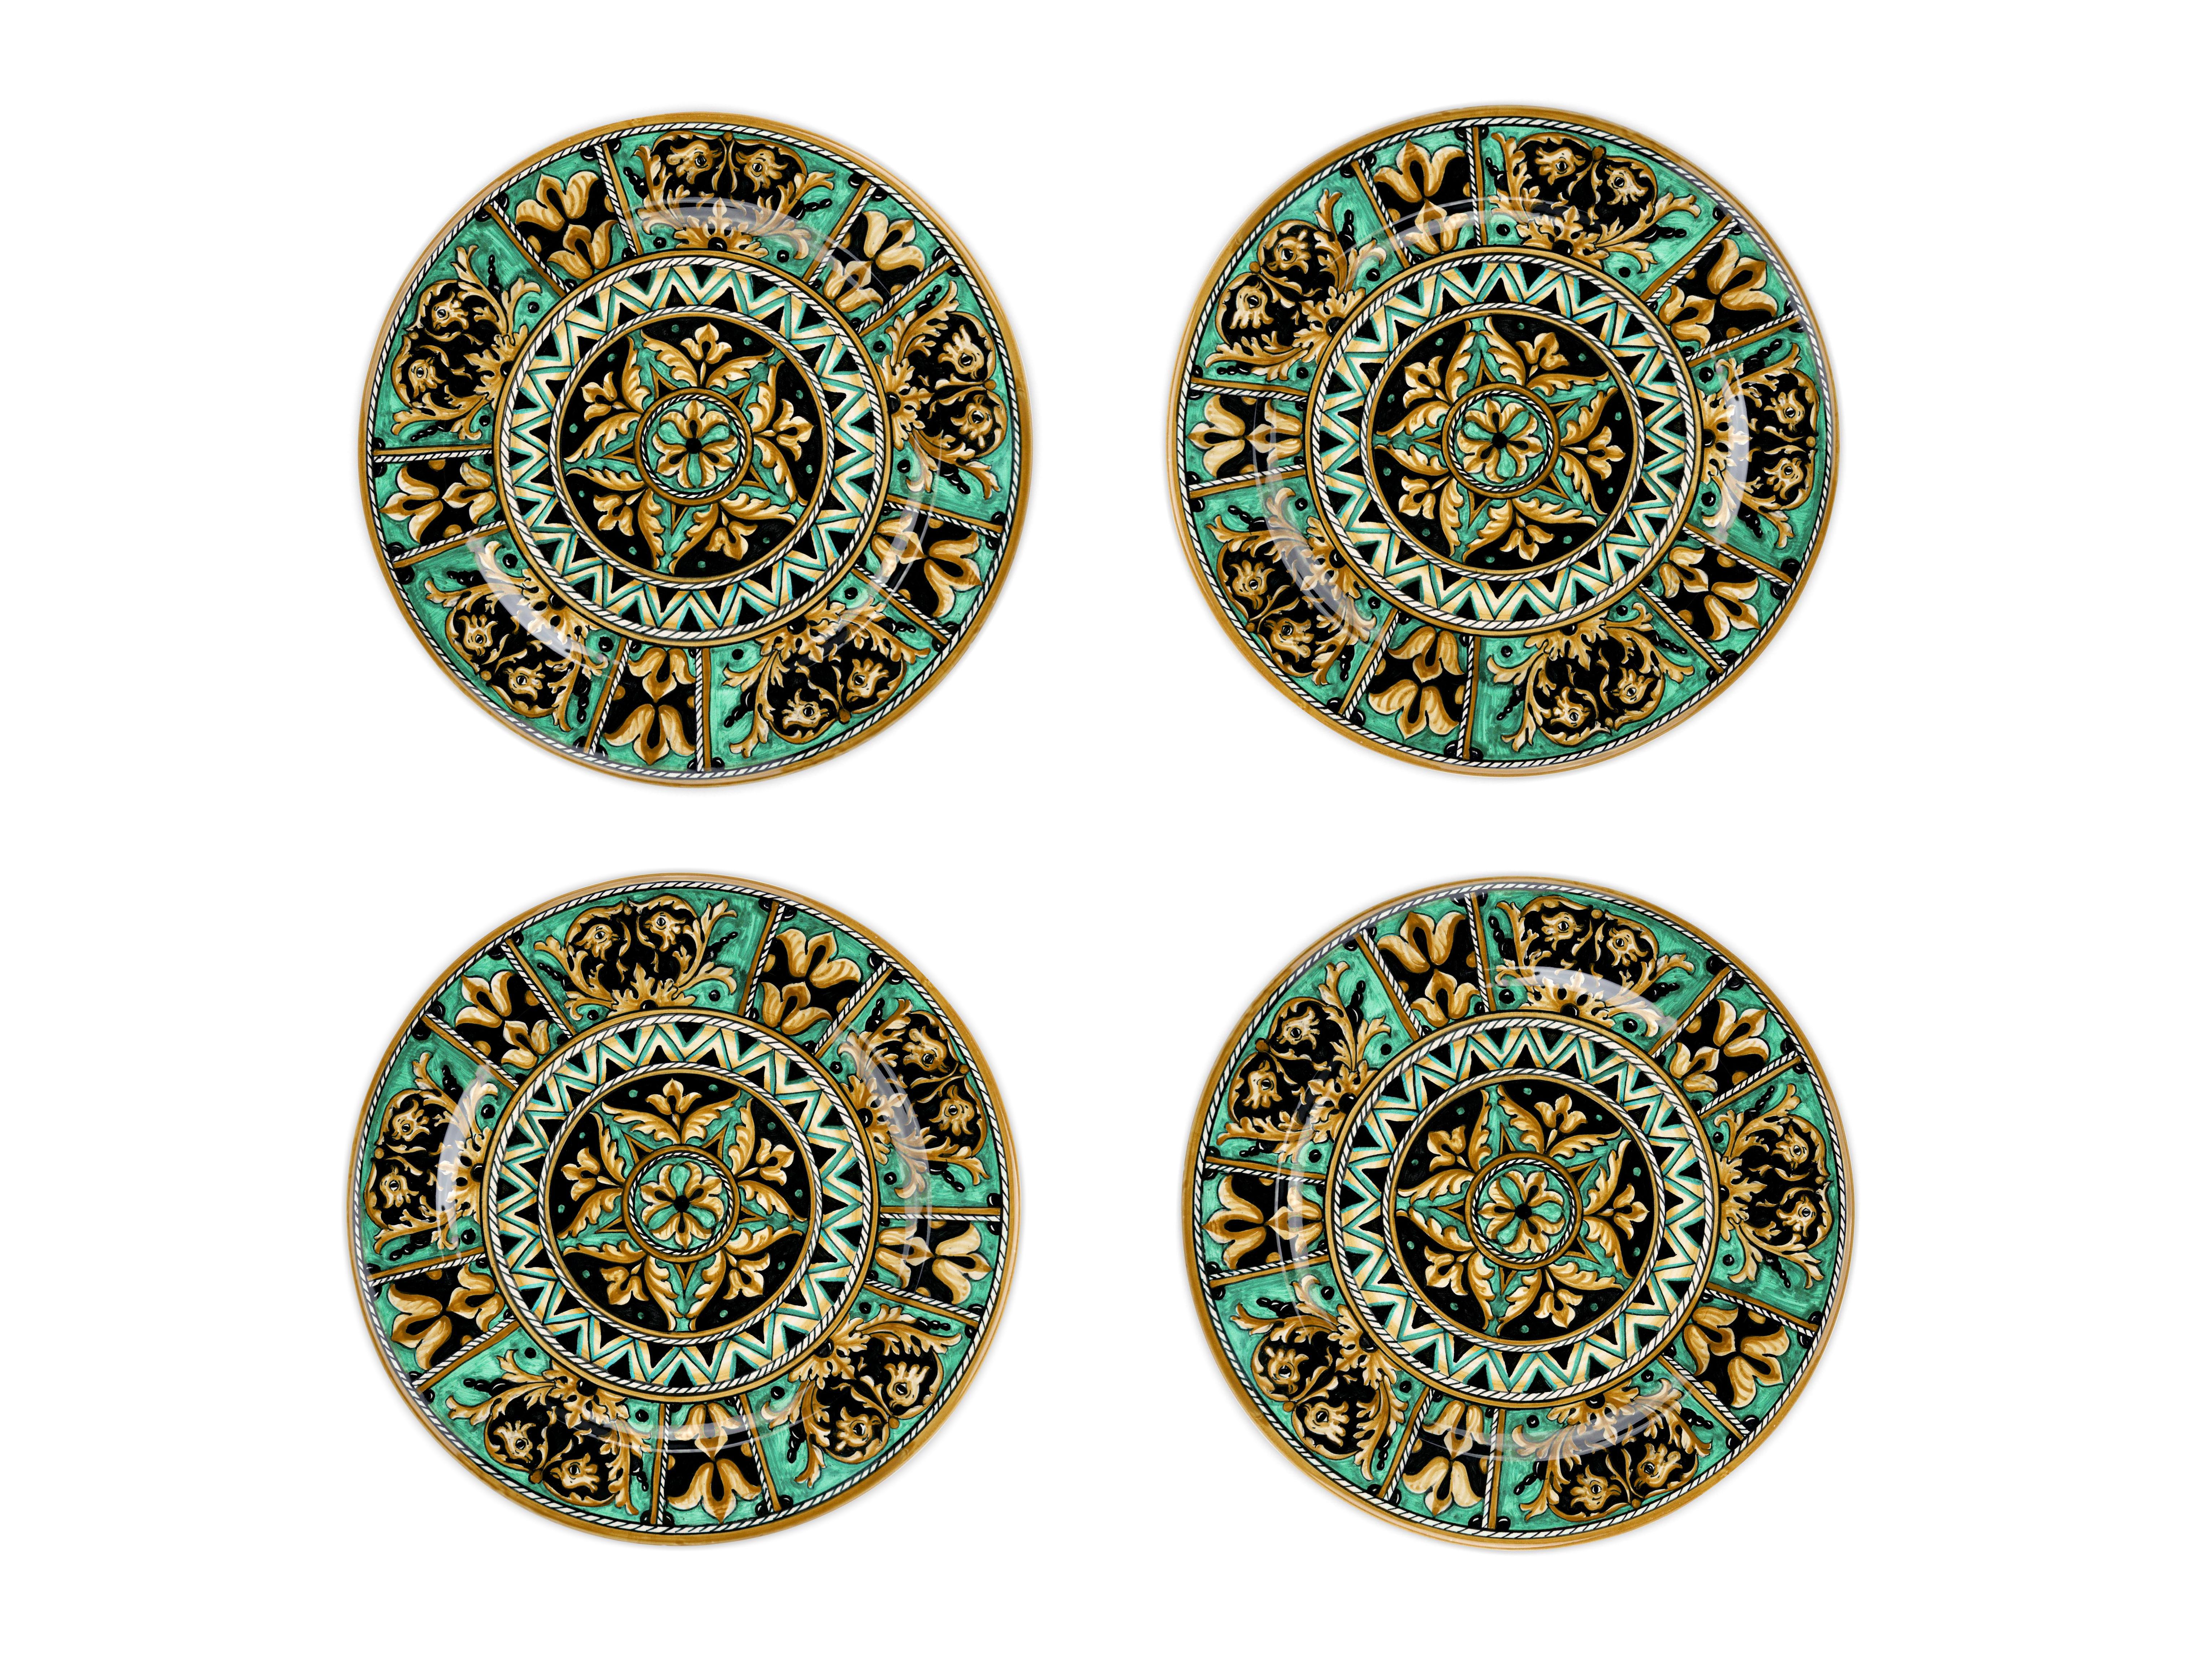 This luxurious set of four plates, in majolica painted in polychrome, reinterprets the 